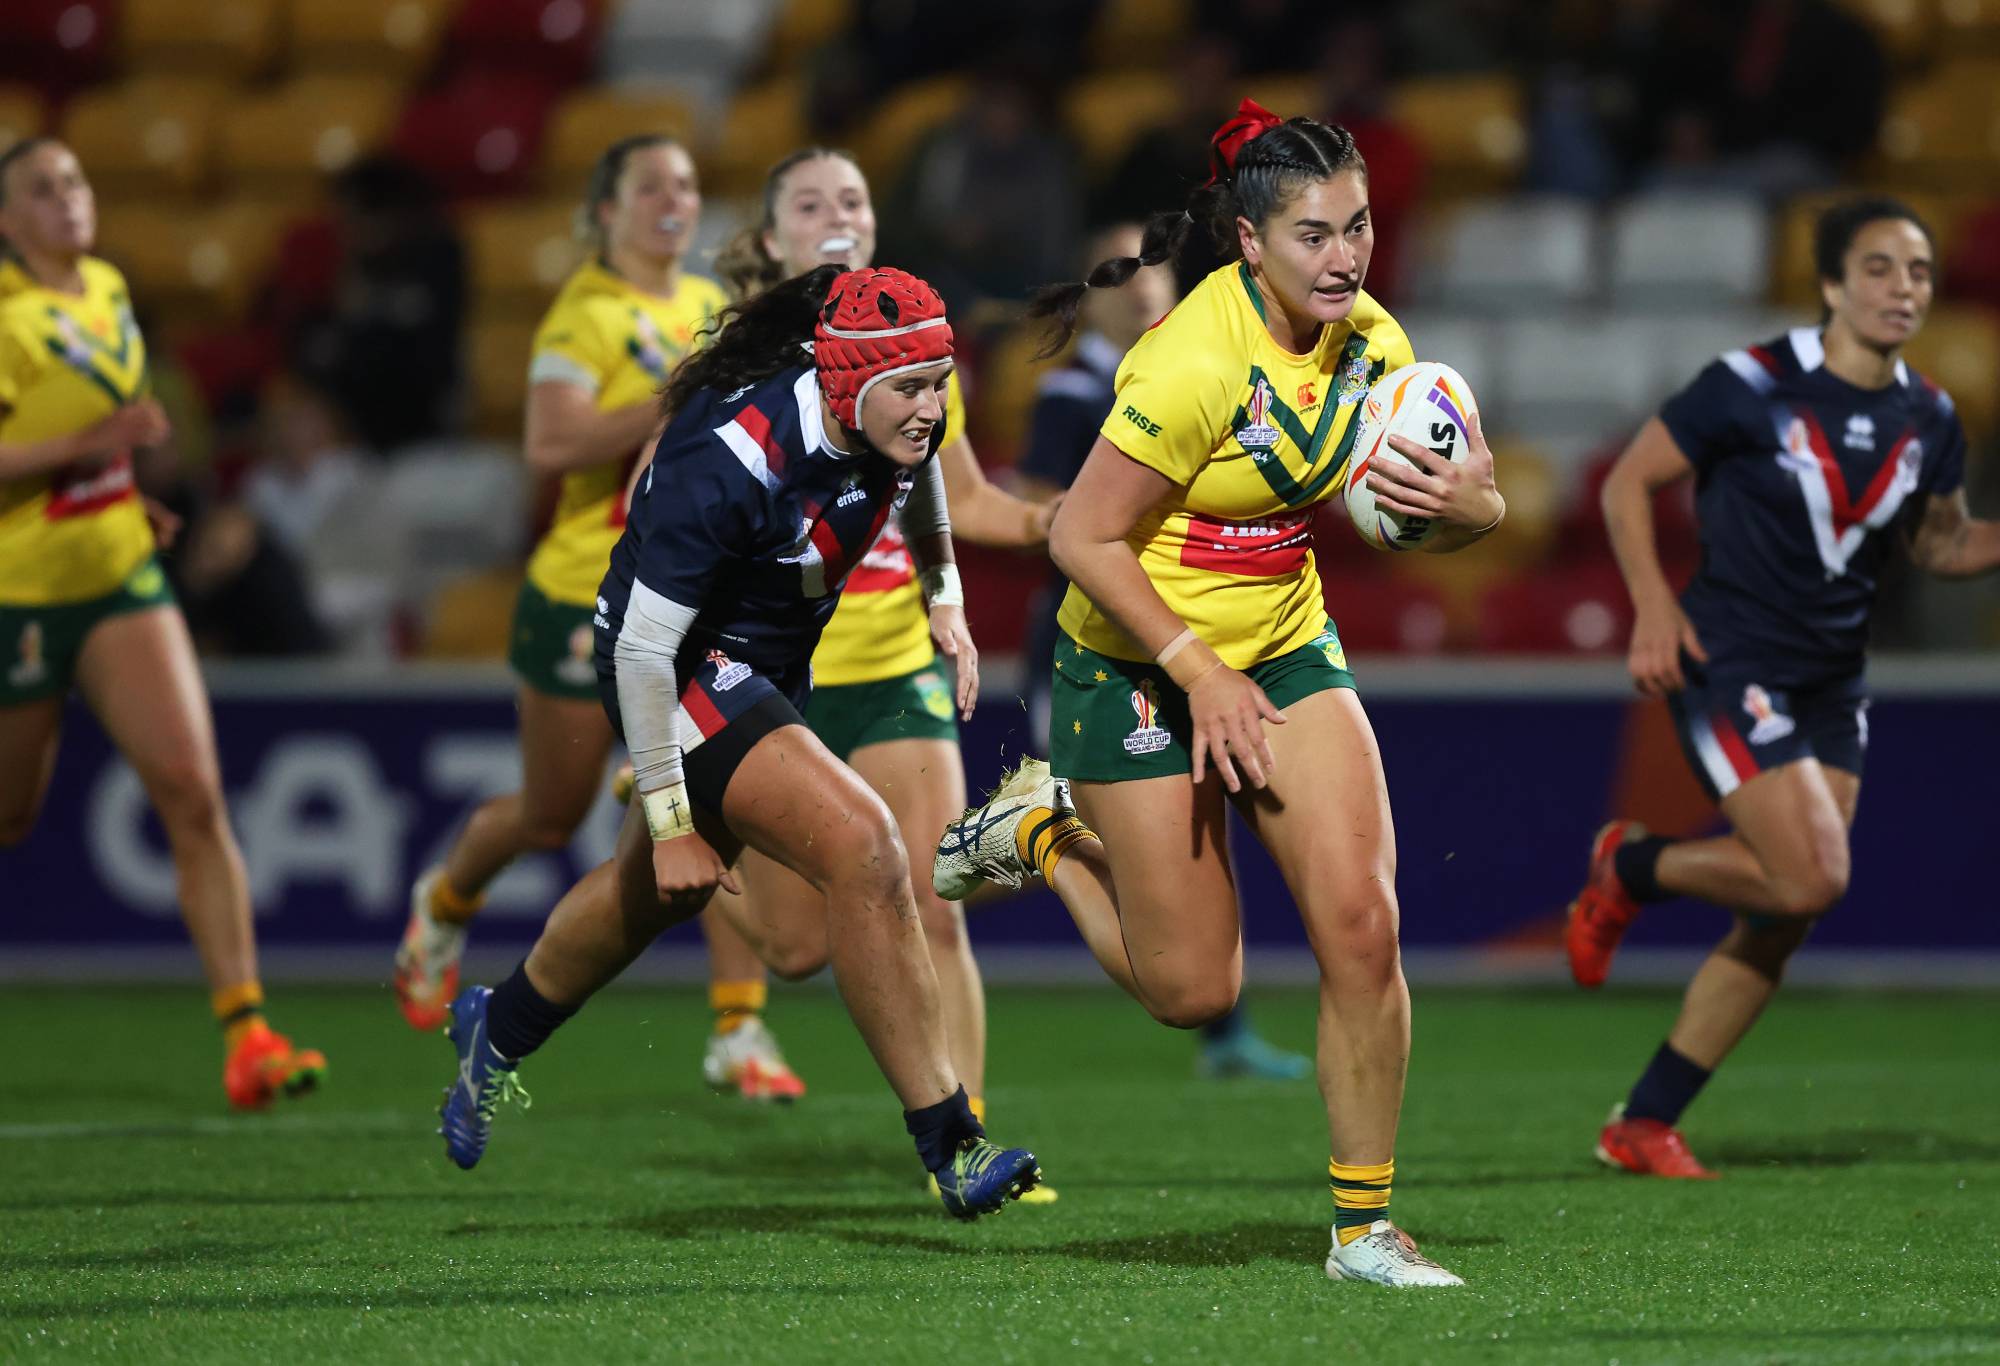 YORK, ENGLAND - NOVEMBER 06: Olivia Kernick of Australia goes over for their sides thirteenth try during the Women's Rugby League World Cup Group B match between Australia Women and France Women at LNER Community Stadium on November 06, 2022 in York, England. (Photo by George Wood/Getty Images for RLWC)